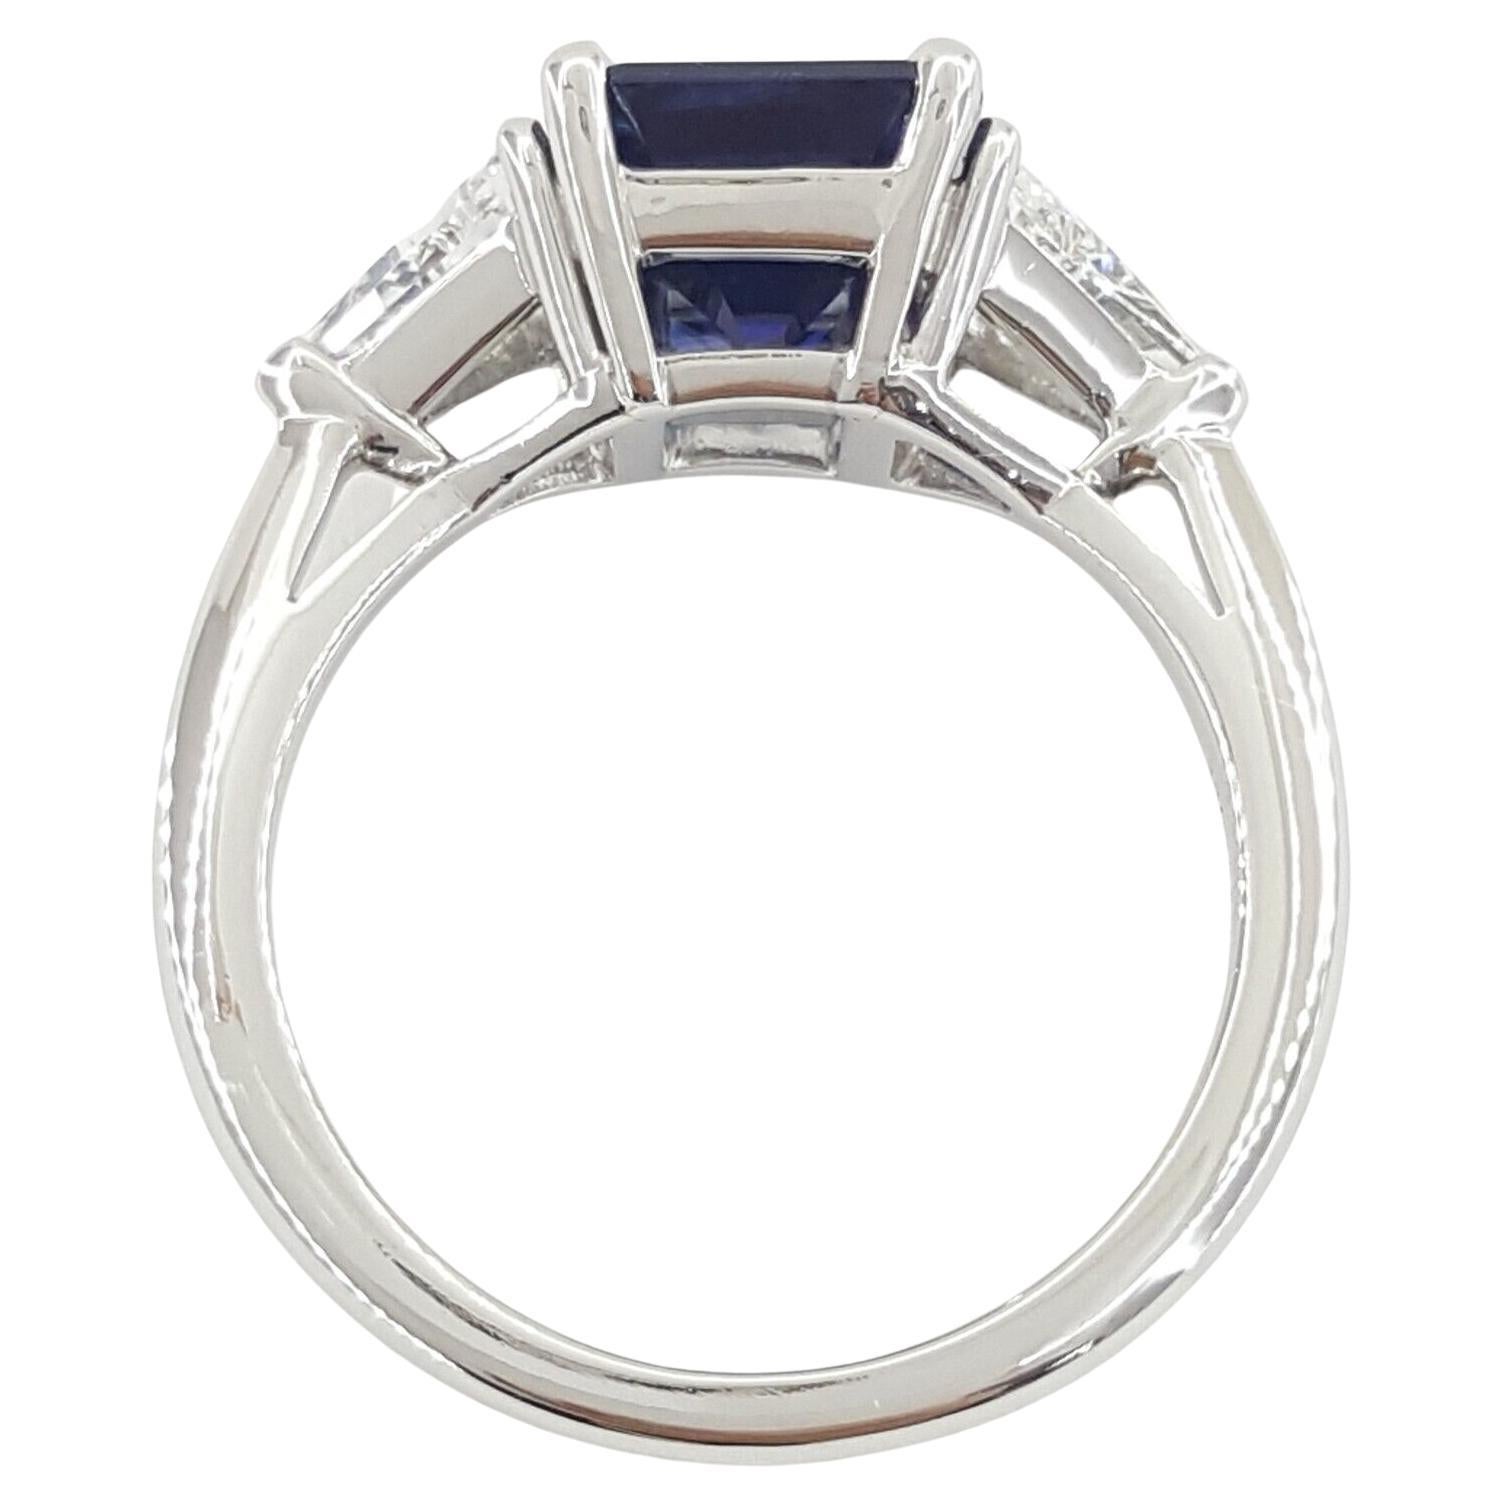 Tiffany & Co. 3.5 ct Total Weight 3-Stone Emerald Cut Sapphire & Trillion Brilliant Cut Diamond Engagement Ring in Platinum.



The ring weighs 5.3 grams, size 4.5, the center stone is a Natural 2.85 ct Emerald Cut Vivid Blue Color.

There are 2